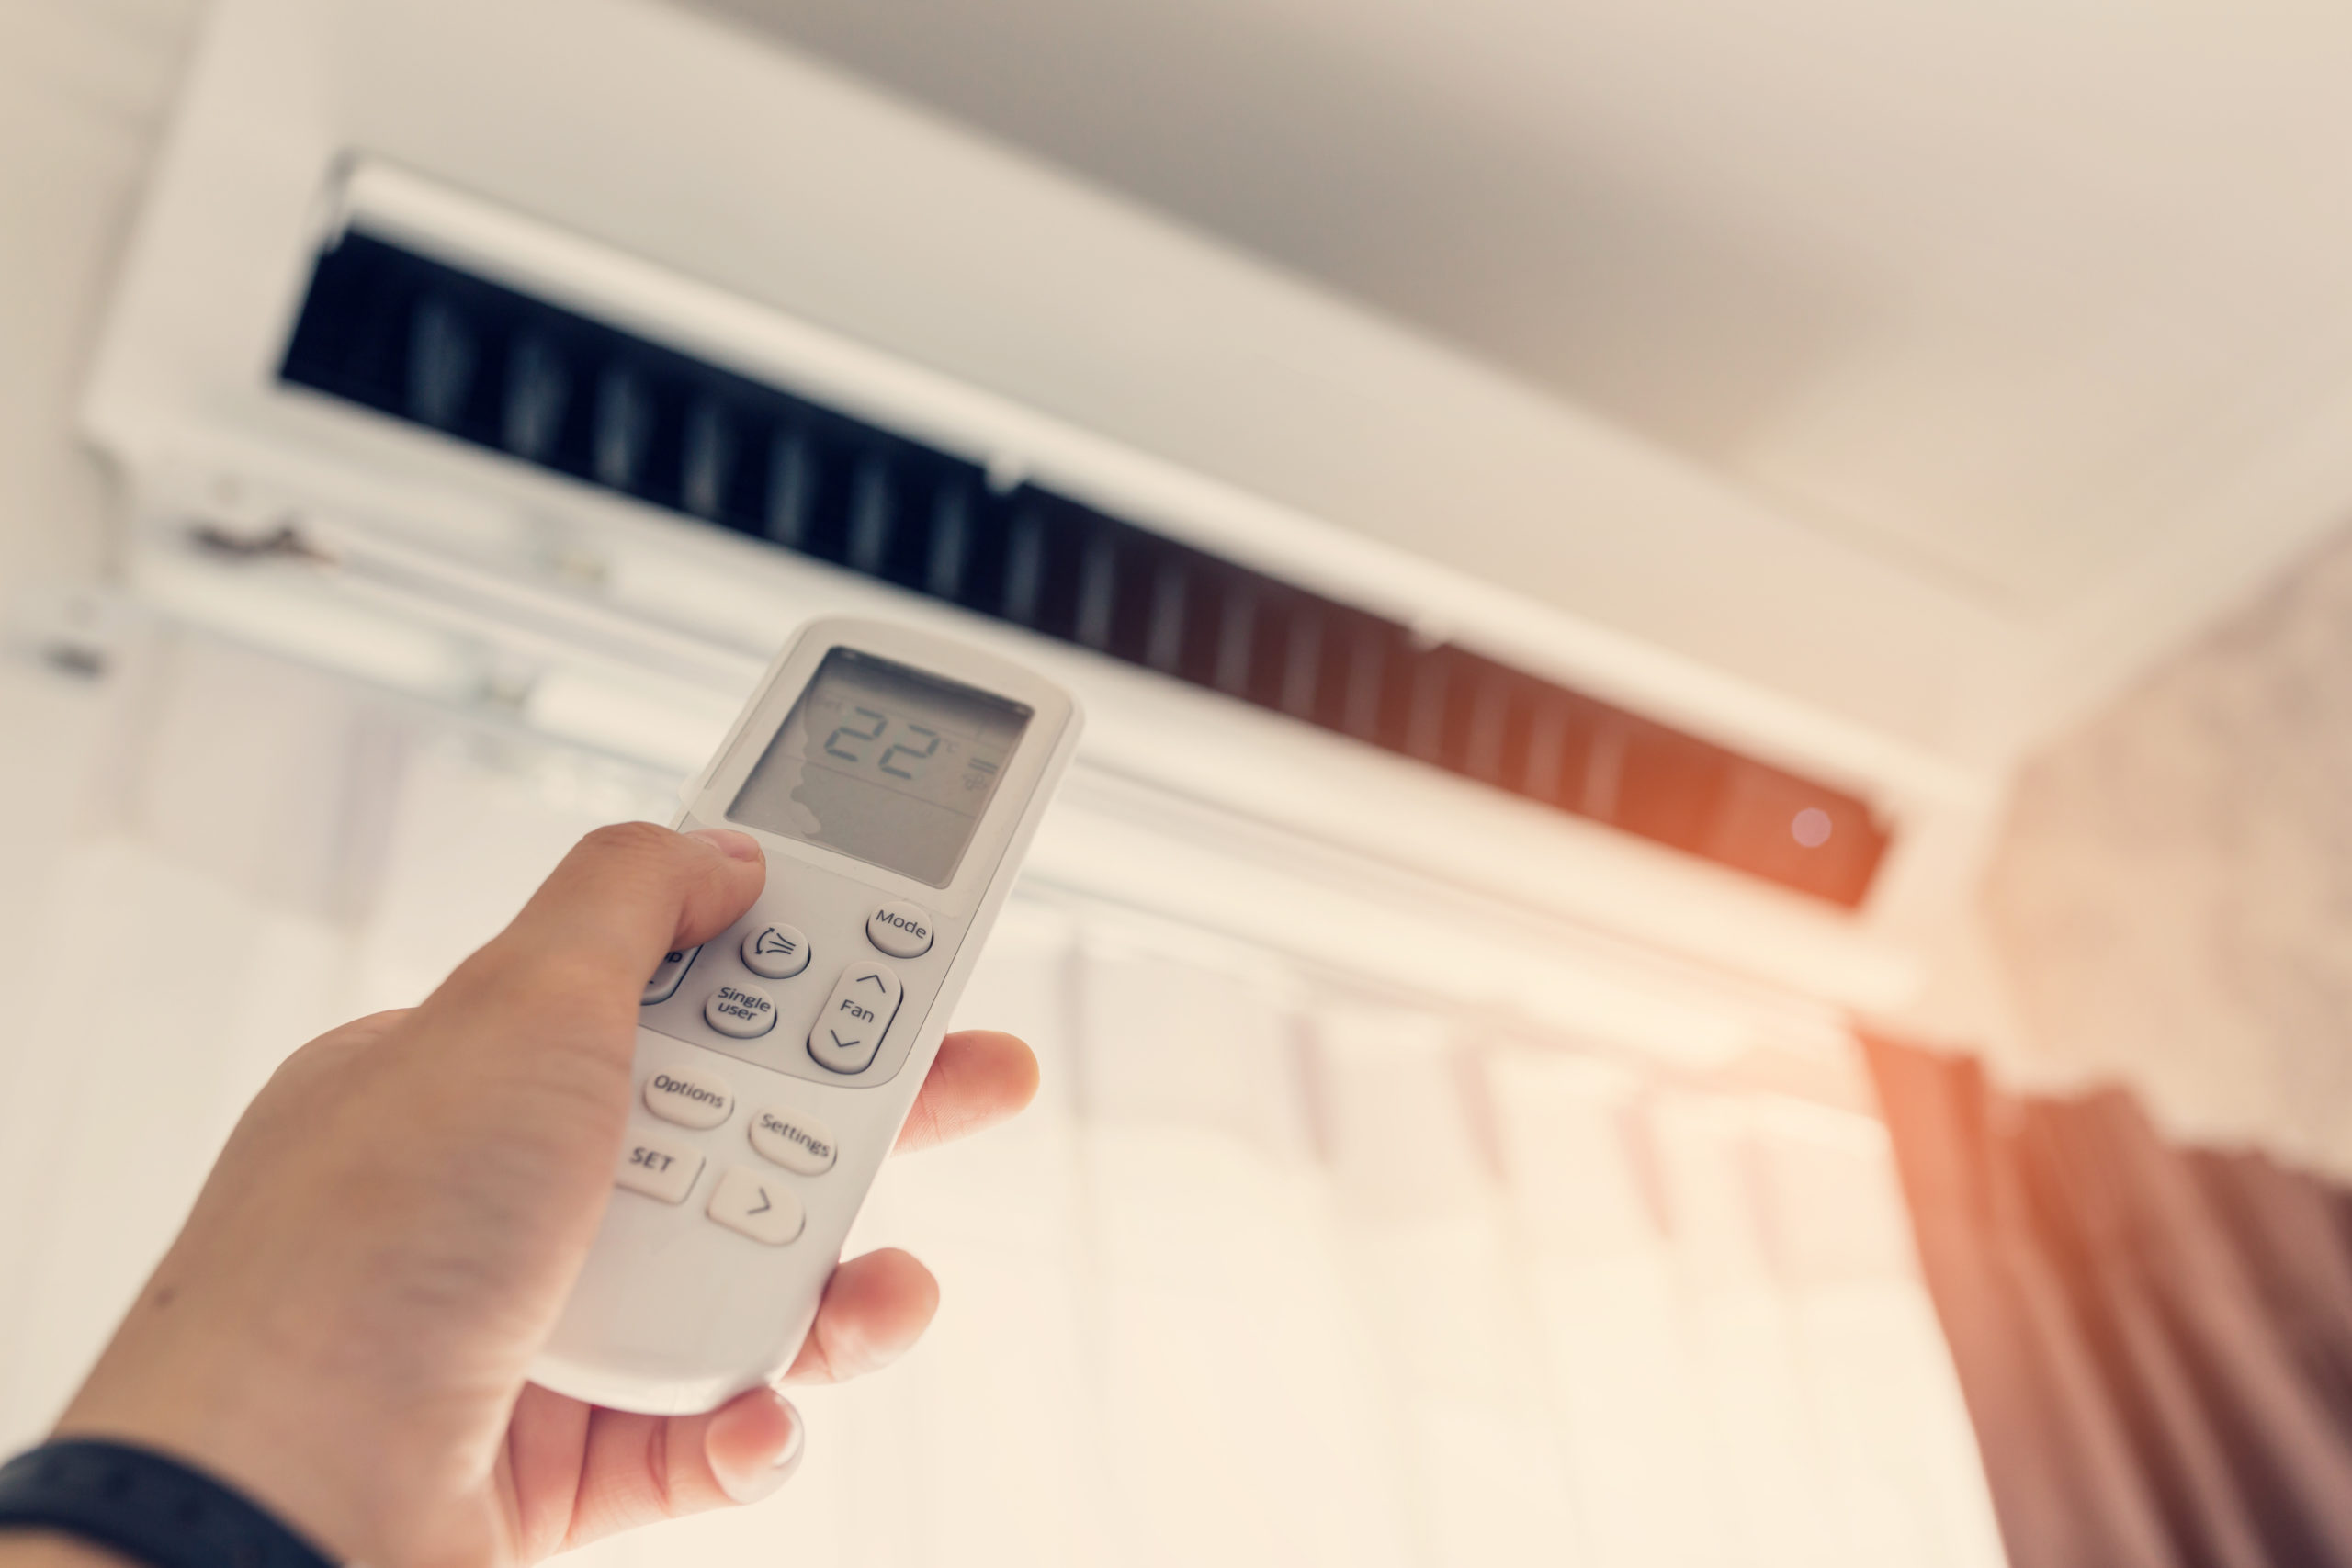 What does the “Cool” button on the air conditioning control mean?